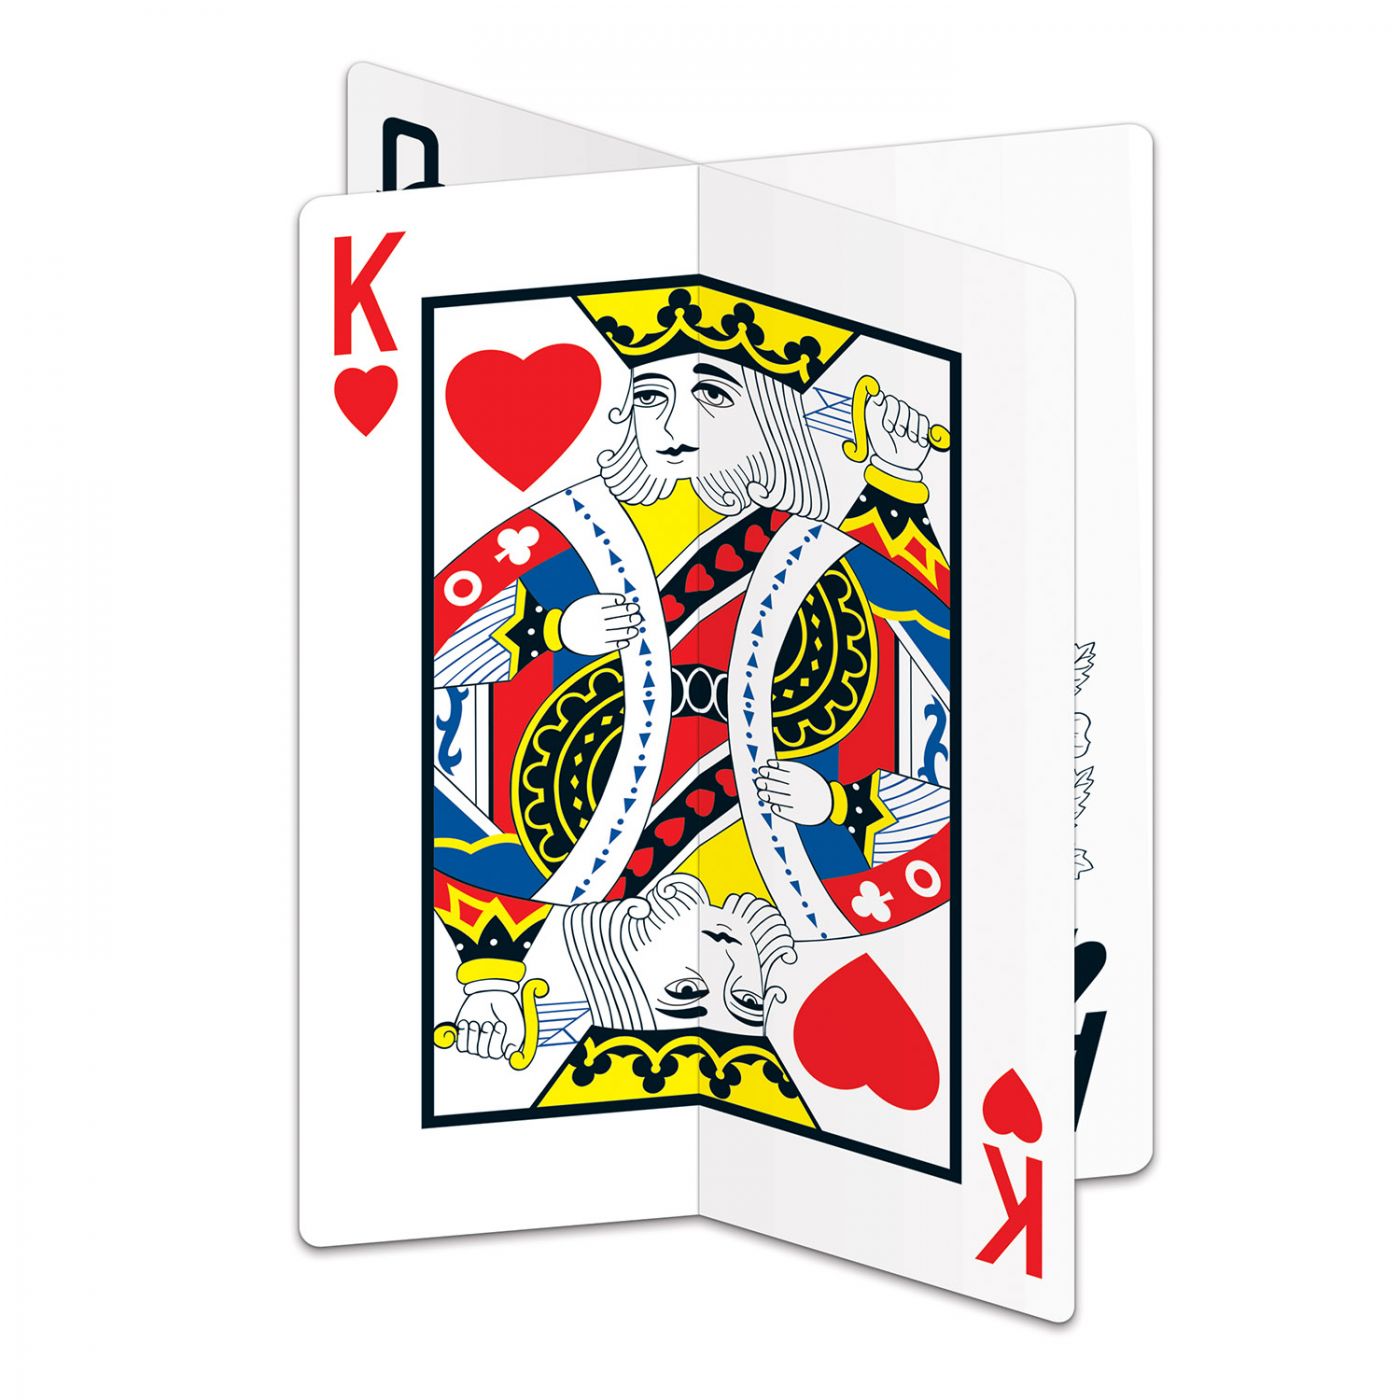 3-D Playing Card Centrepiece (12) image